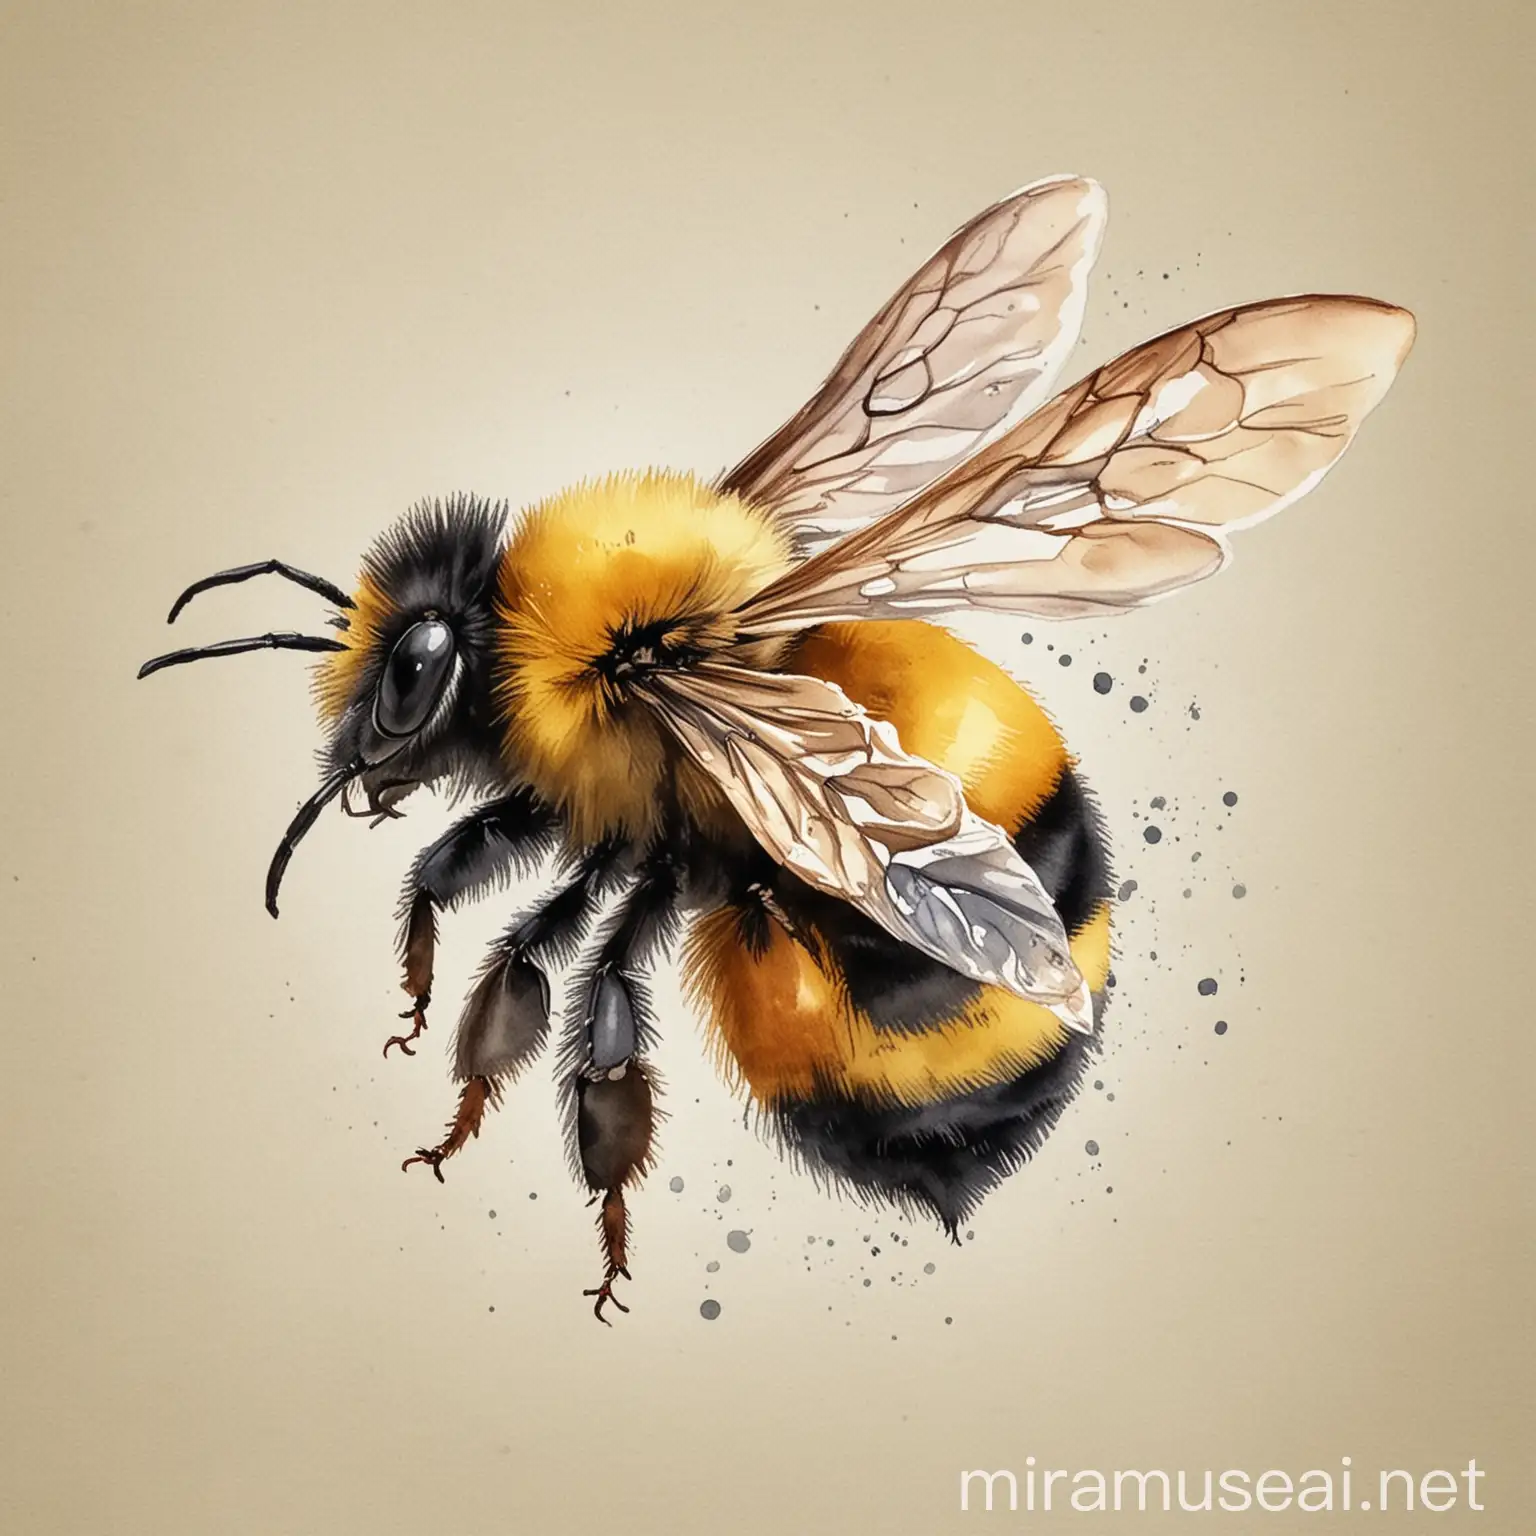 Vibrant Bumble Bee Watercolor Illustration Delicate Insect Artwork for Nature Enthusiasts